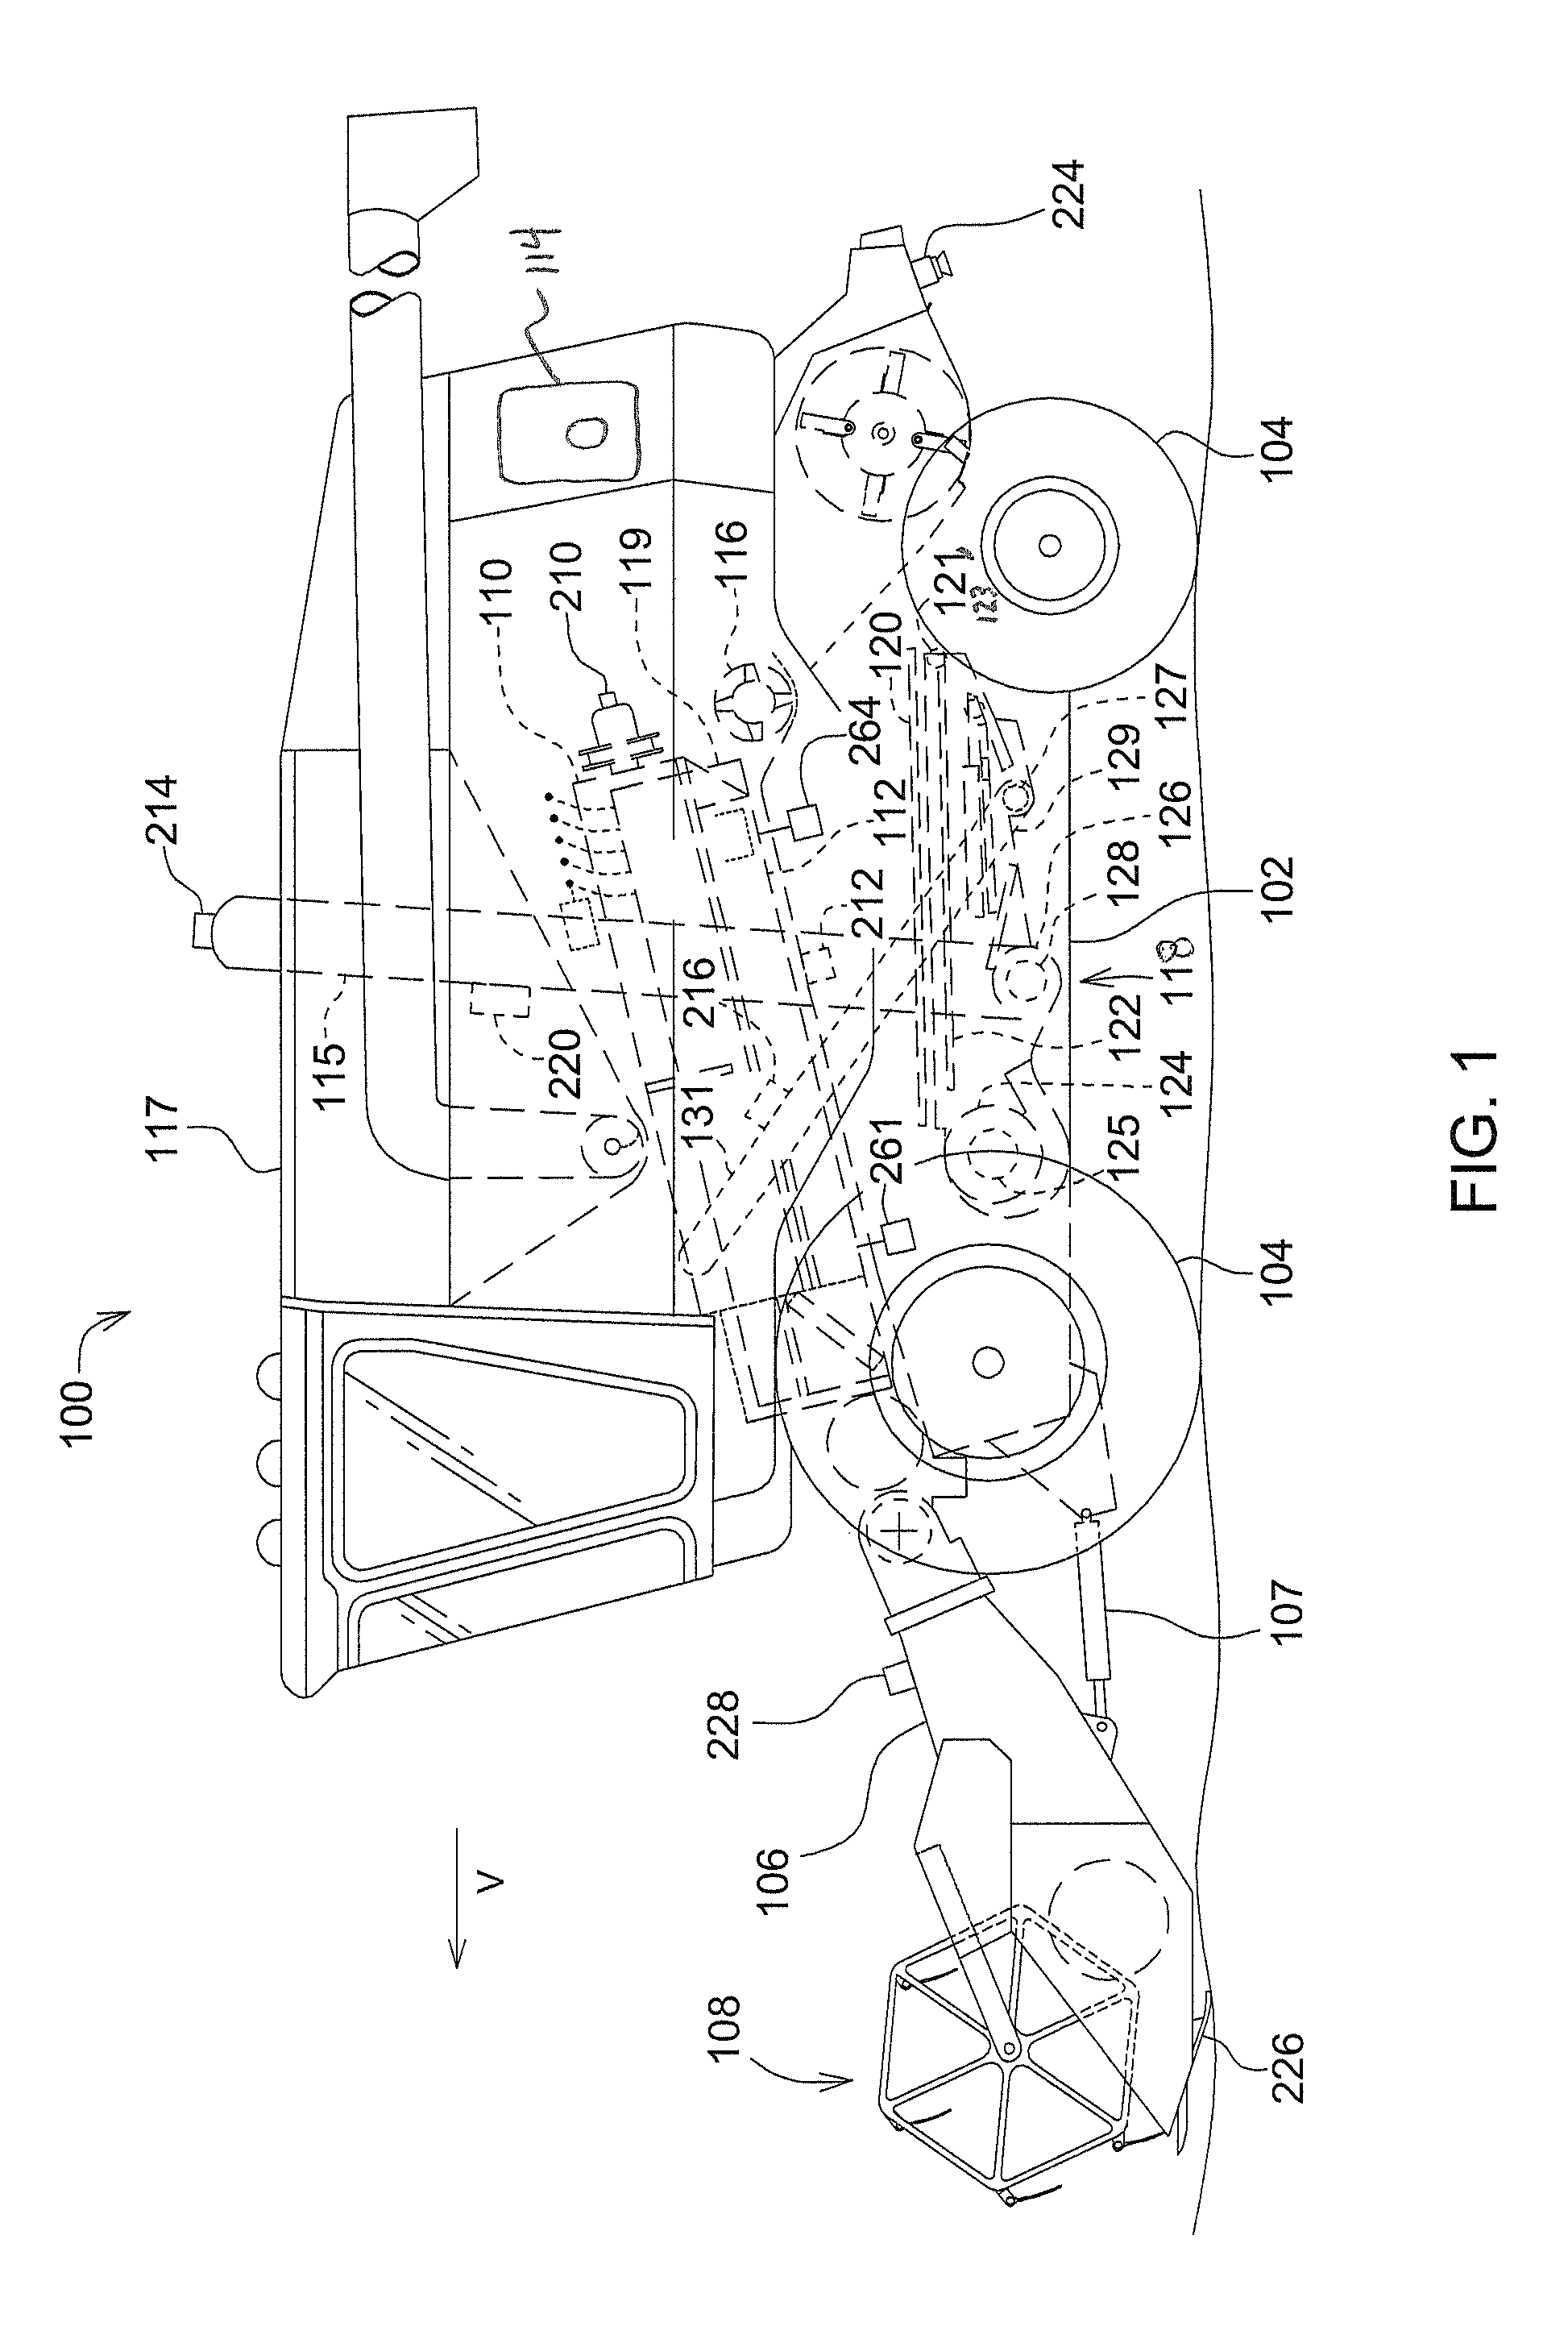 Automatic tuning of an intelligent combine